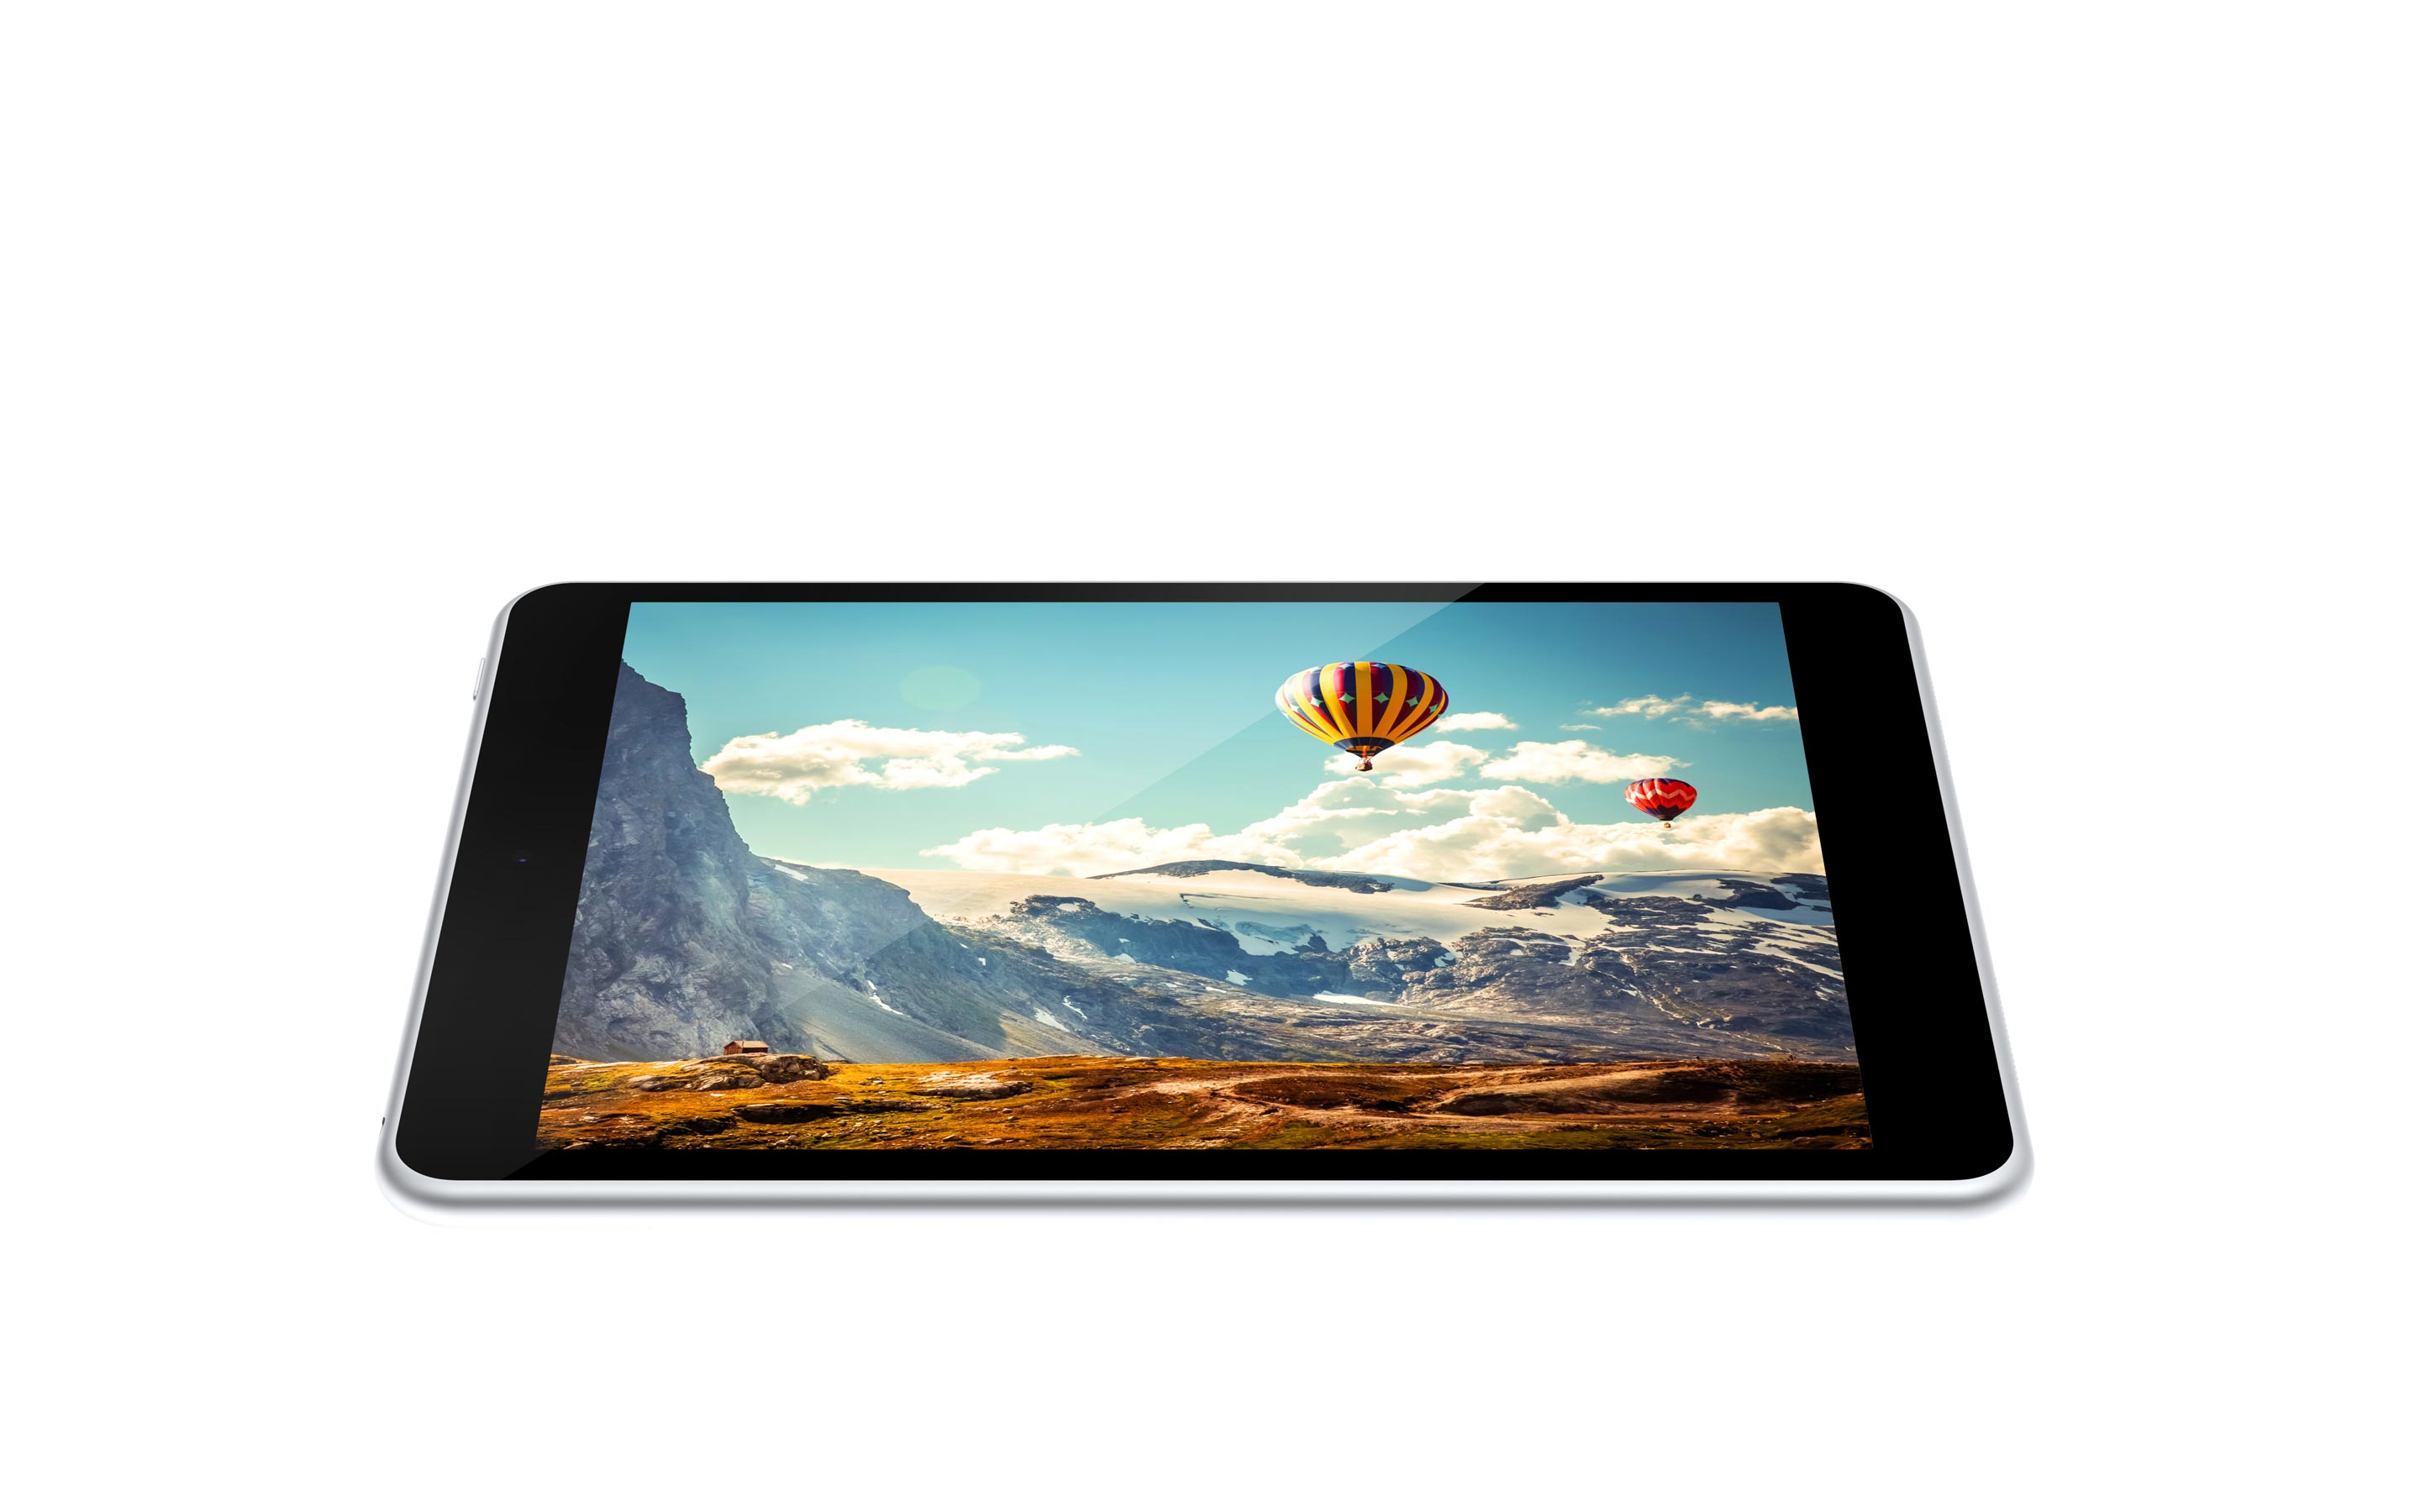 Nokia N1 Android Tablet Releasing In China On Jan 7